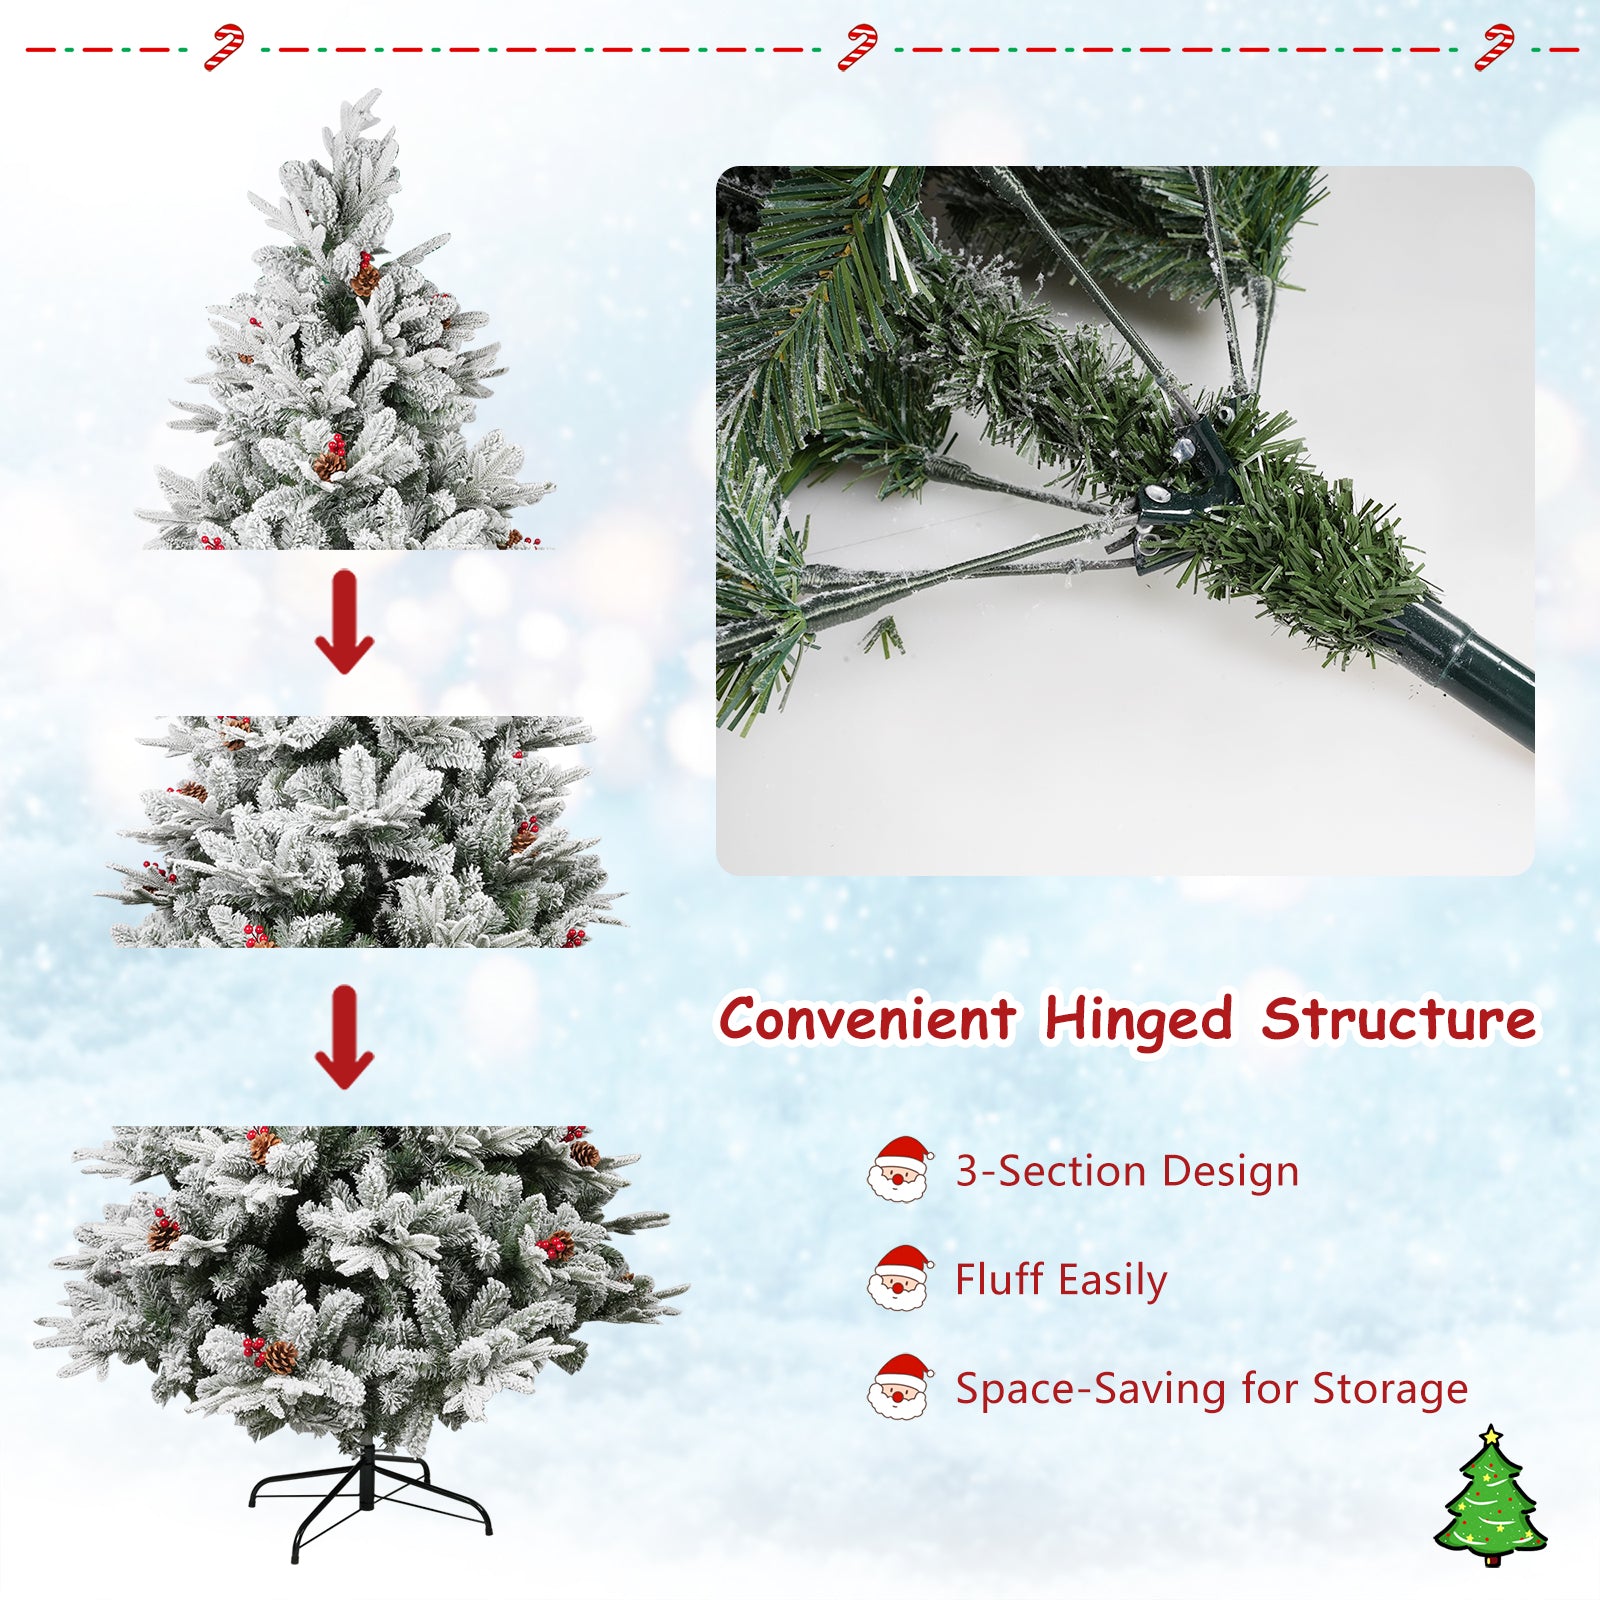 LUCKYERMORE 6.9ft Artificial Christmas Tree Snow Flocked Xmas Tree with Pine Cones and Red Berries Holiday Decoration